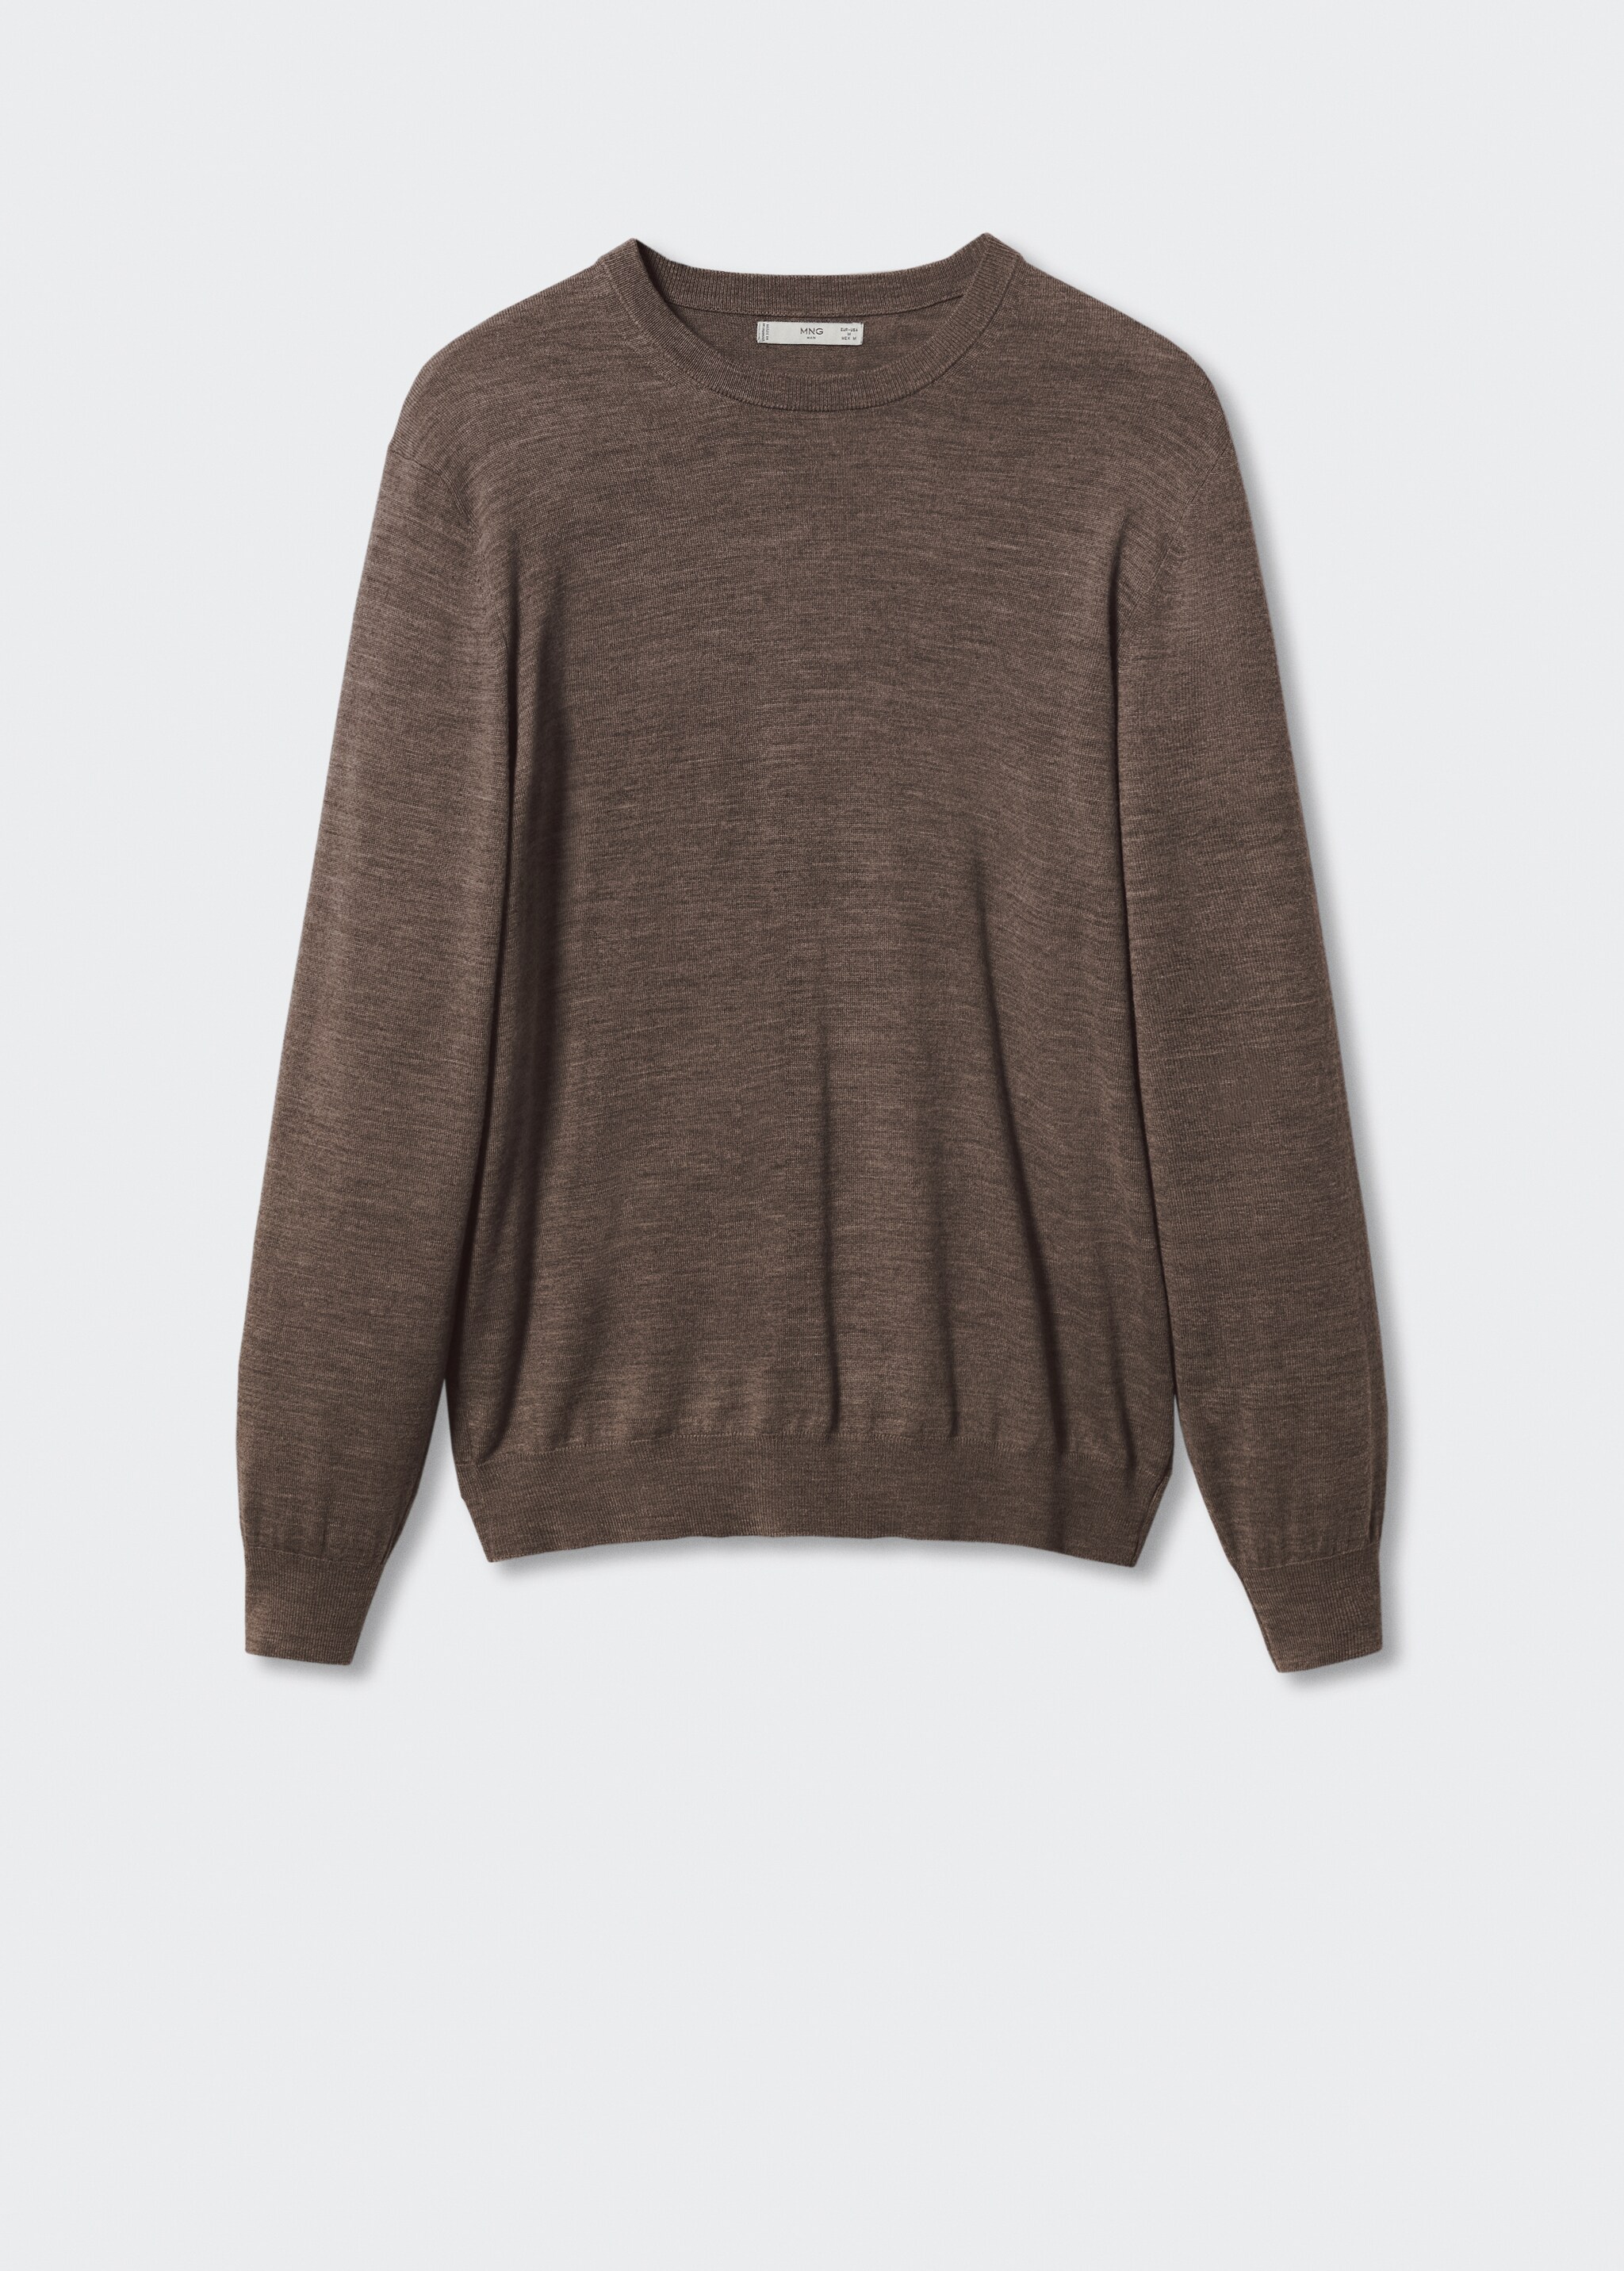 Merino wool washable sweater - Article without model